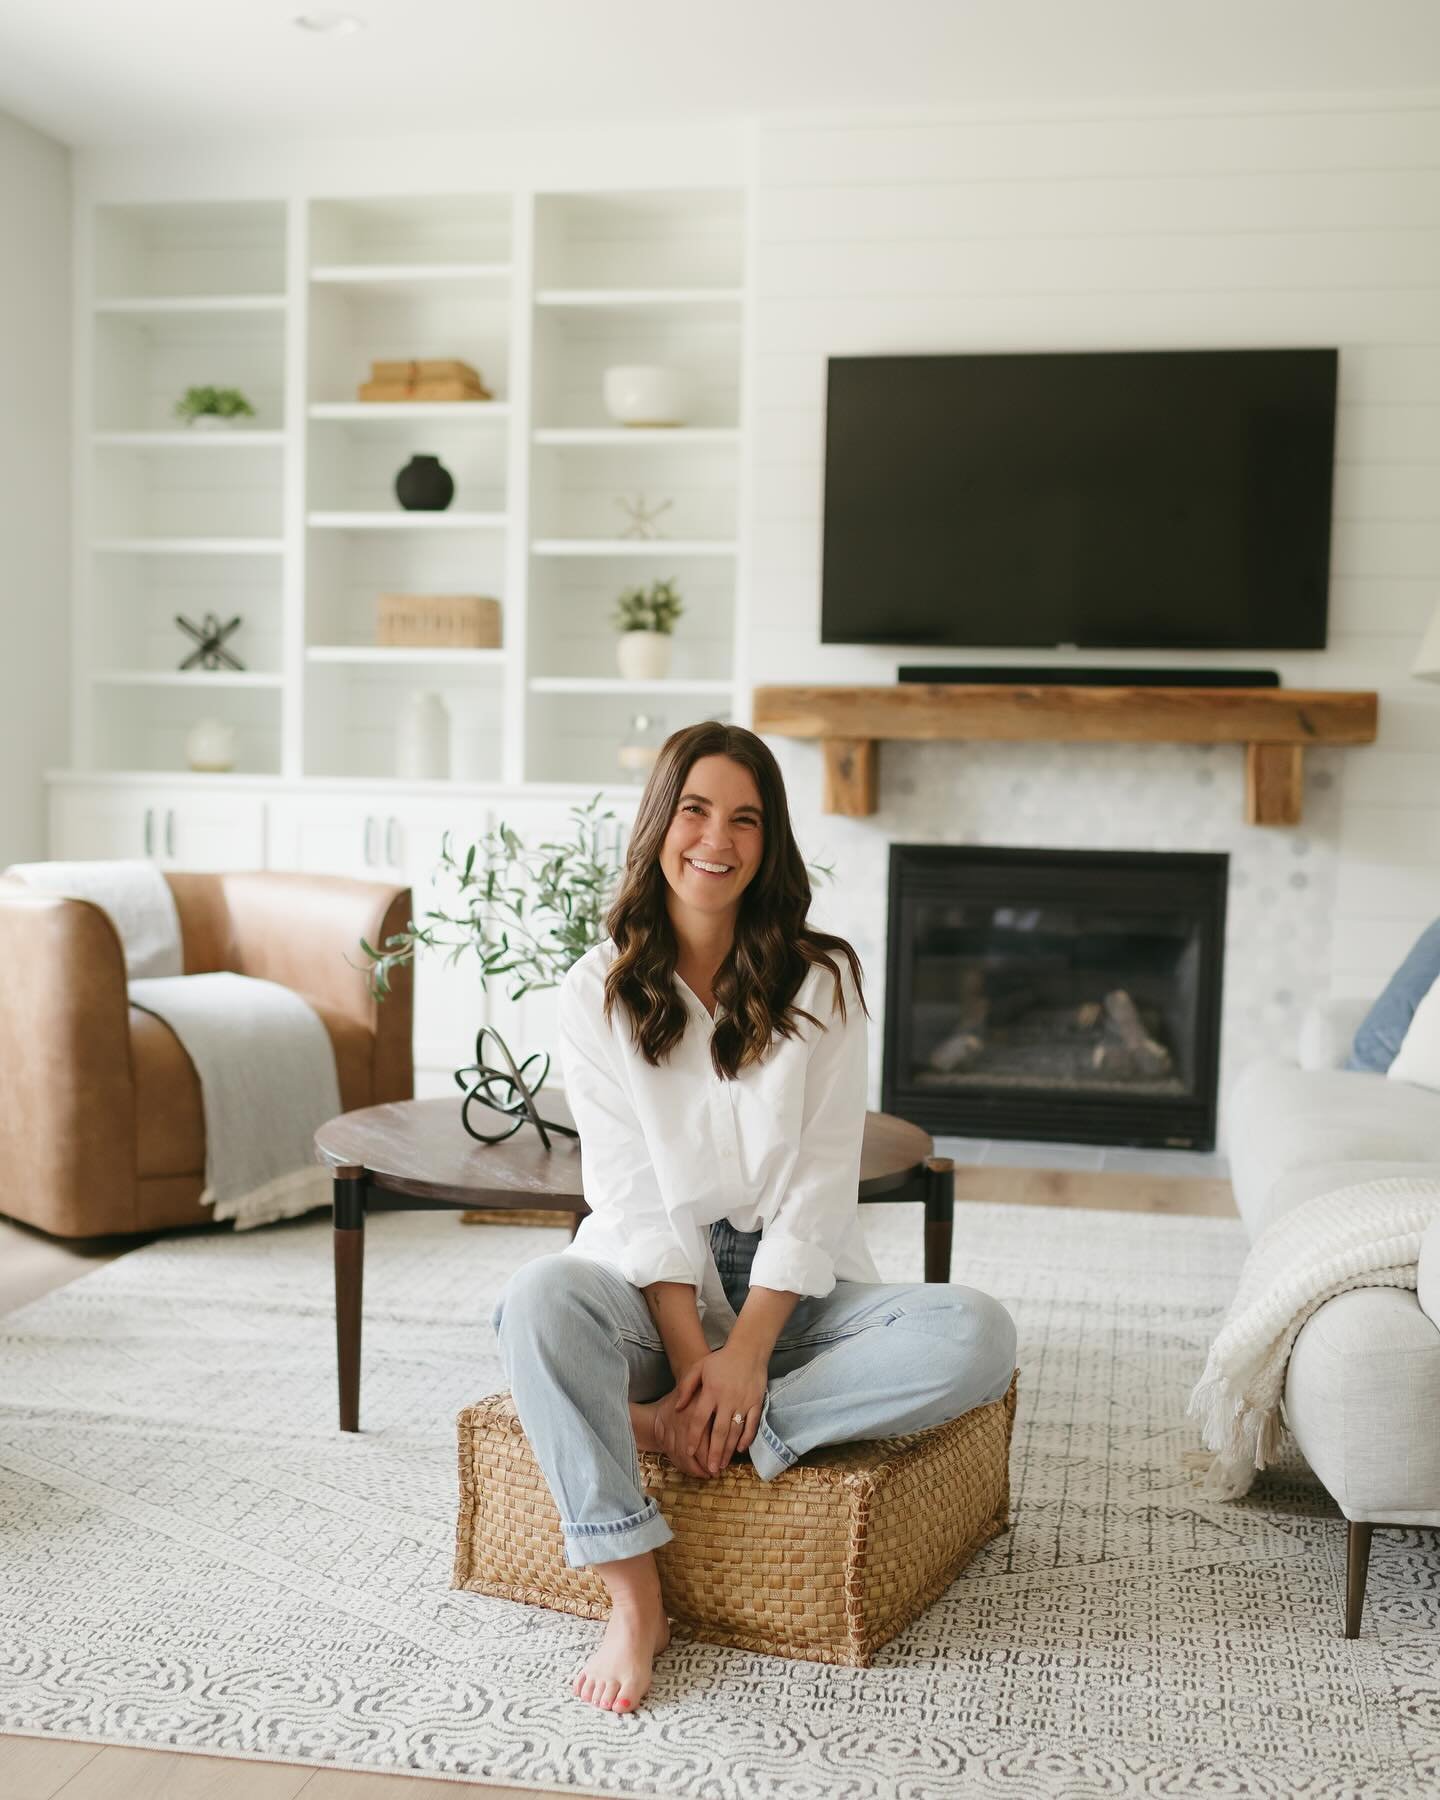 Obsessed with these photos from last month's shoot for @ideal_staging. Teresa is a queen and now I need to go redecorate my home with all this beautiful inspiration! 🤩